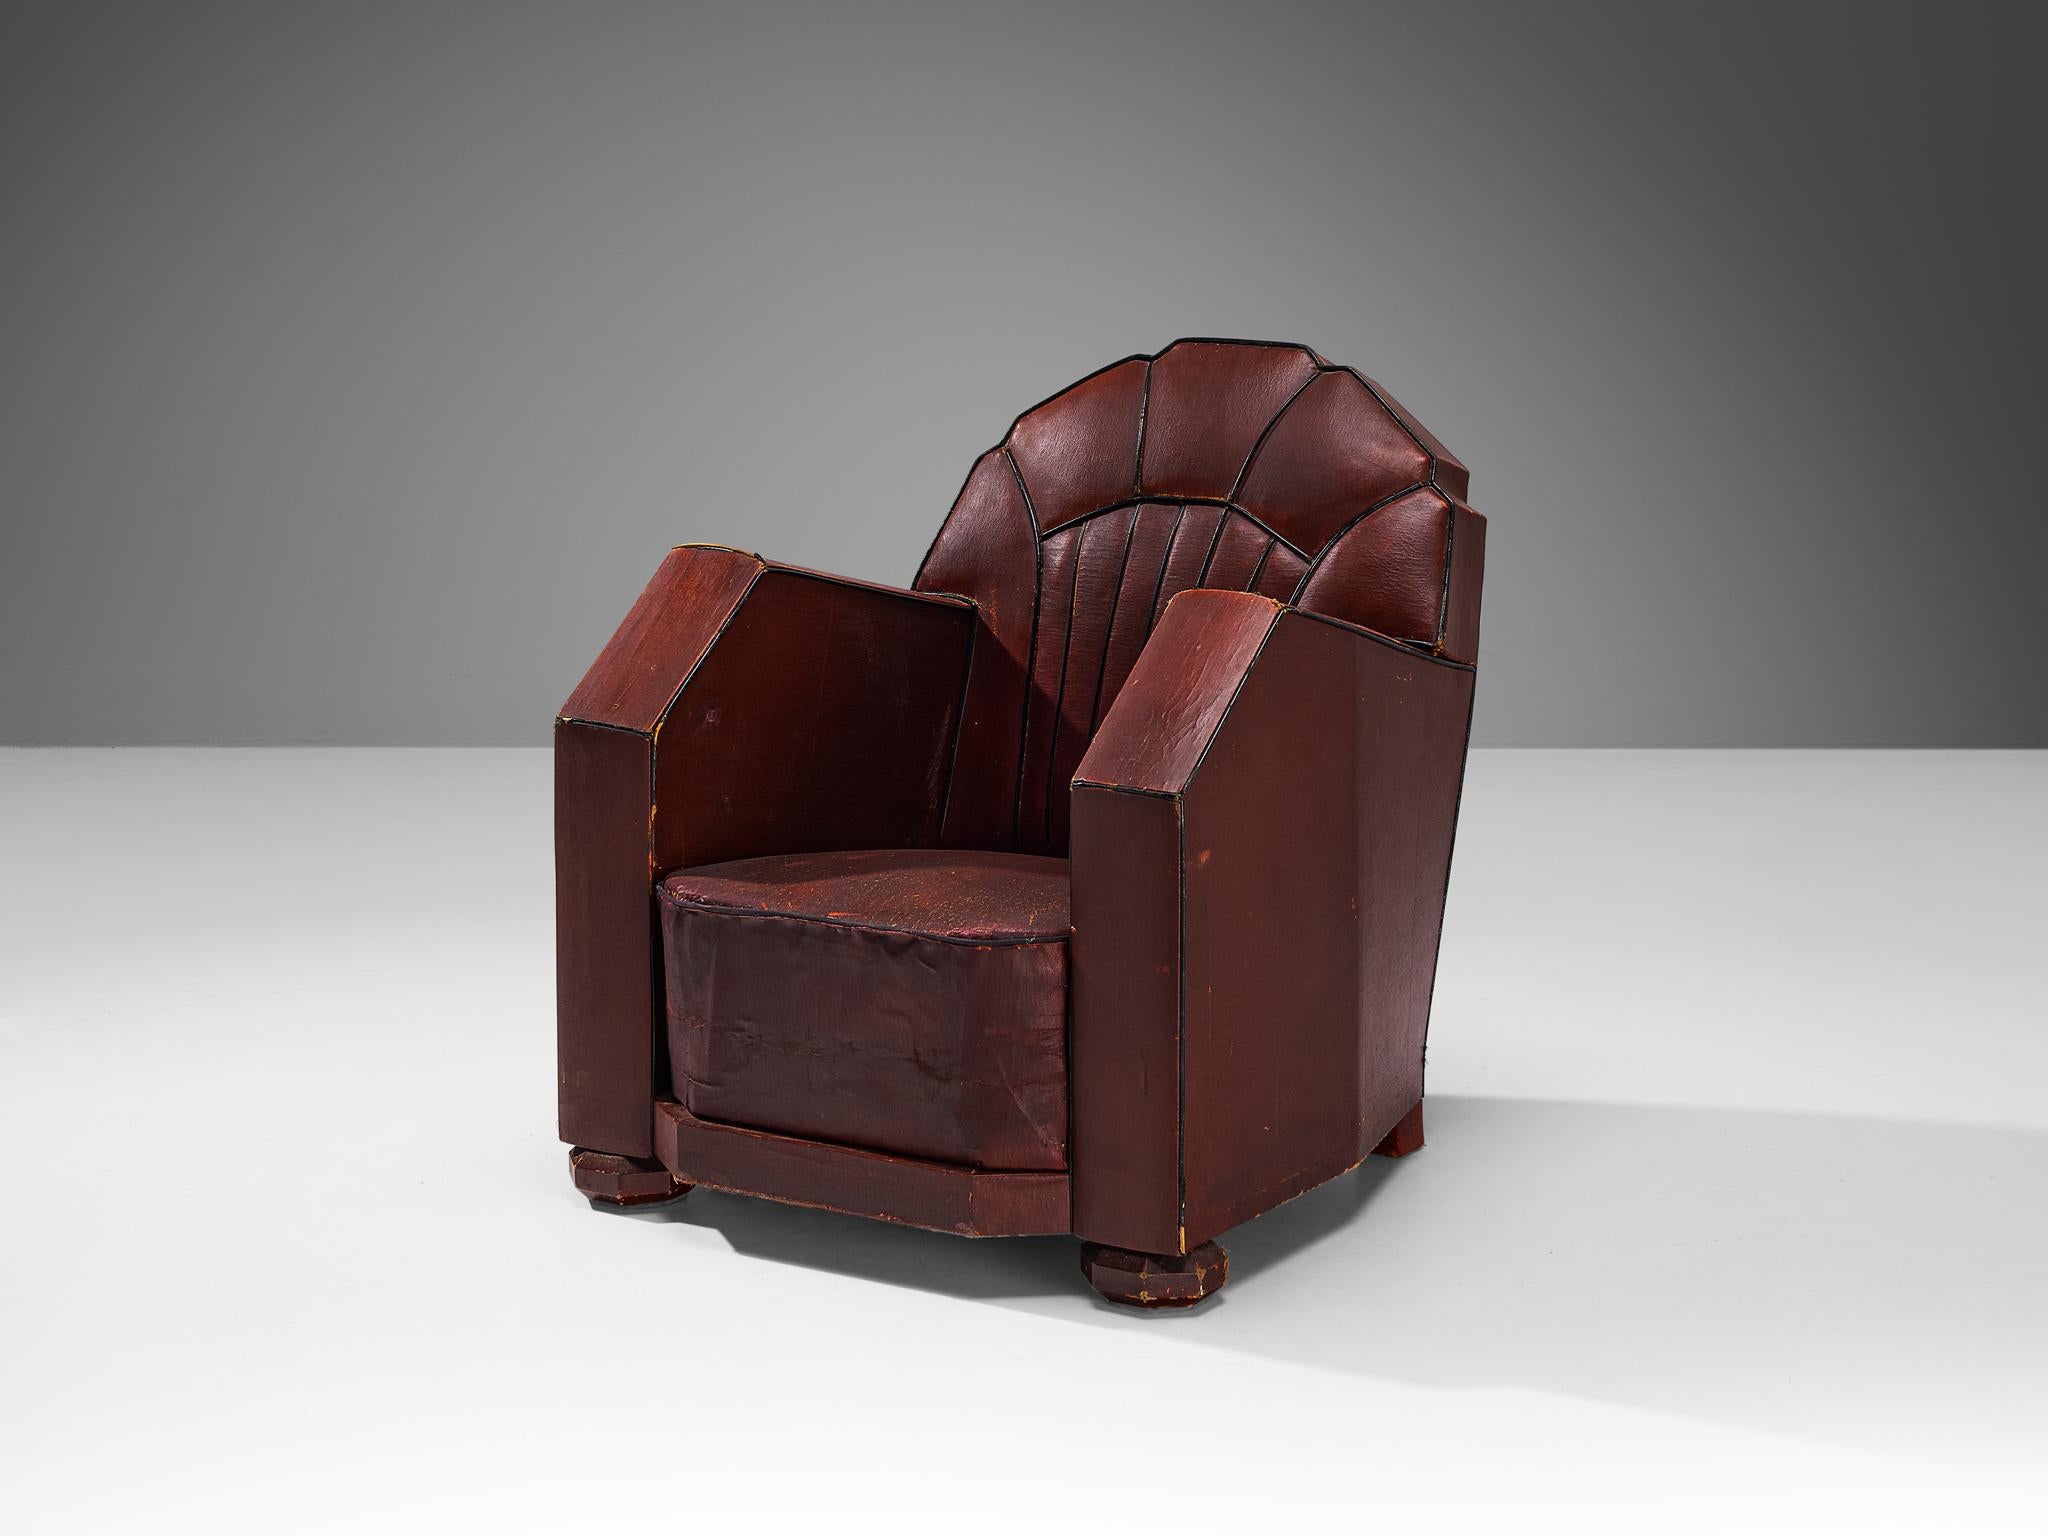 Lounge chair, leather, wood, France, 1930s

This armchair of French origin undoubtedly breathes the Art Deco Period of the 1930s. The chair features beautiful streamlined lines and sharp edges. The contours are beautifully highlighted by the black